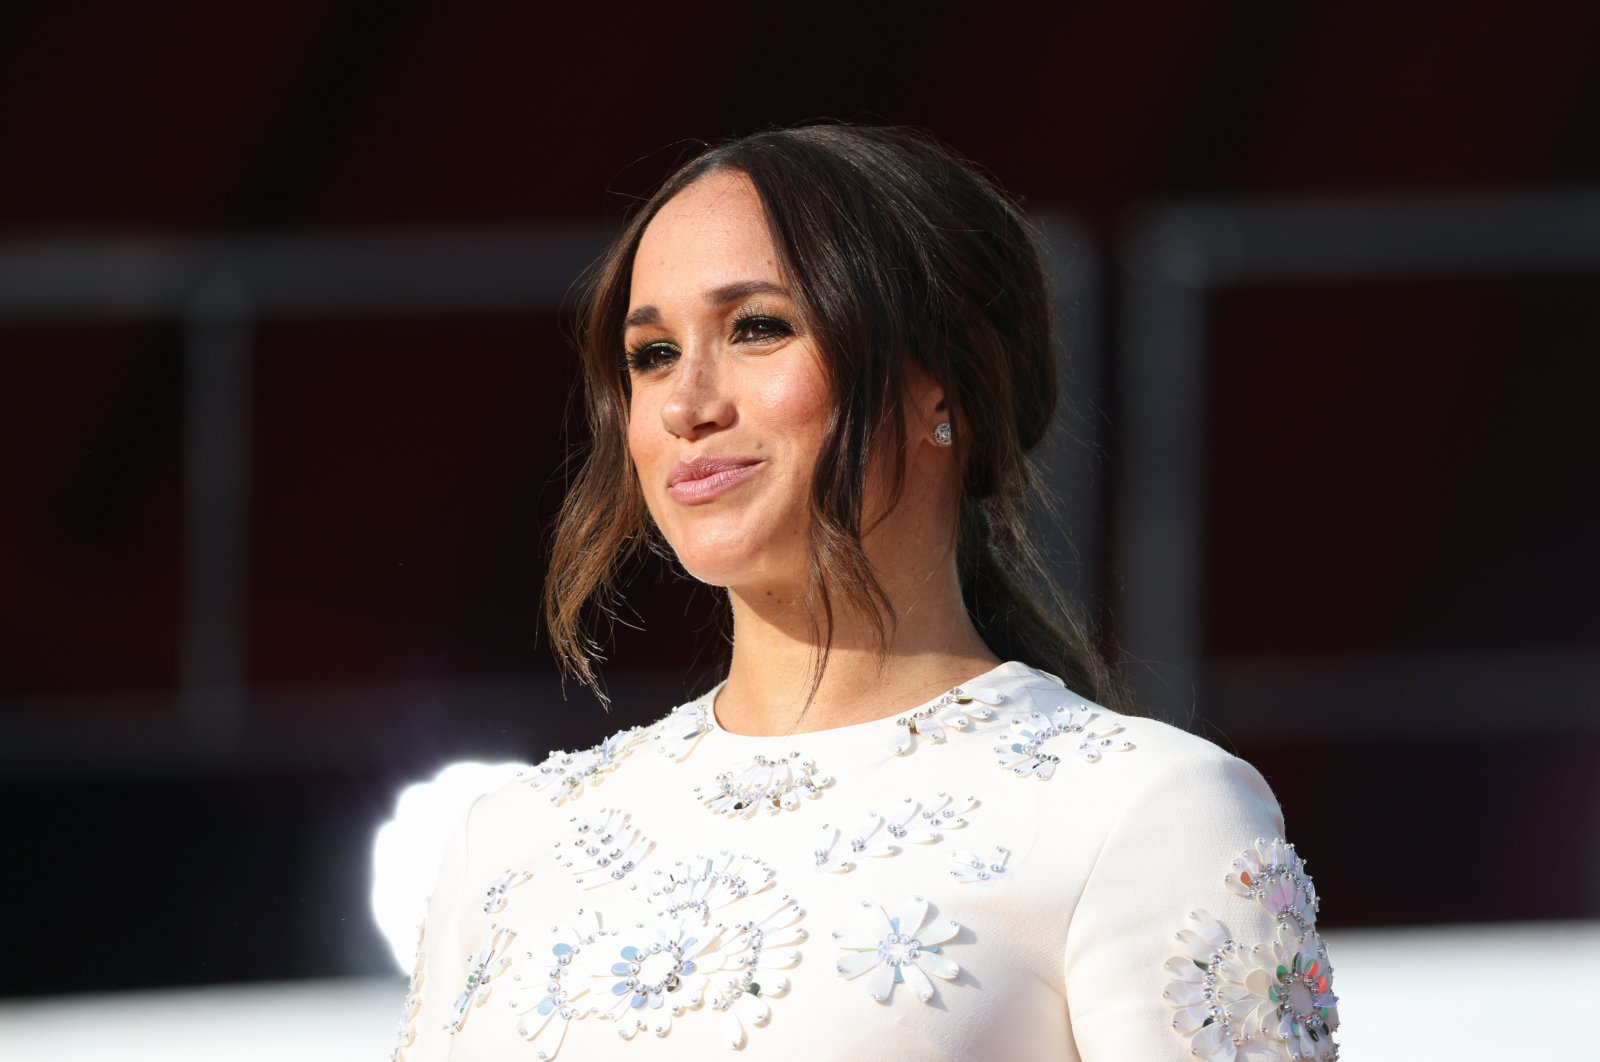 Meghan Markle appears onstage at the 2021 Global Citizen Live concert at Central Park in New York, U.S., Sept. 25, 2021. (Reuters Photo)